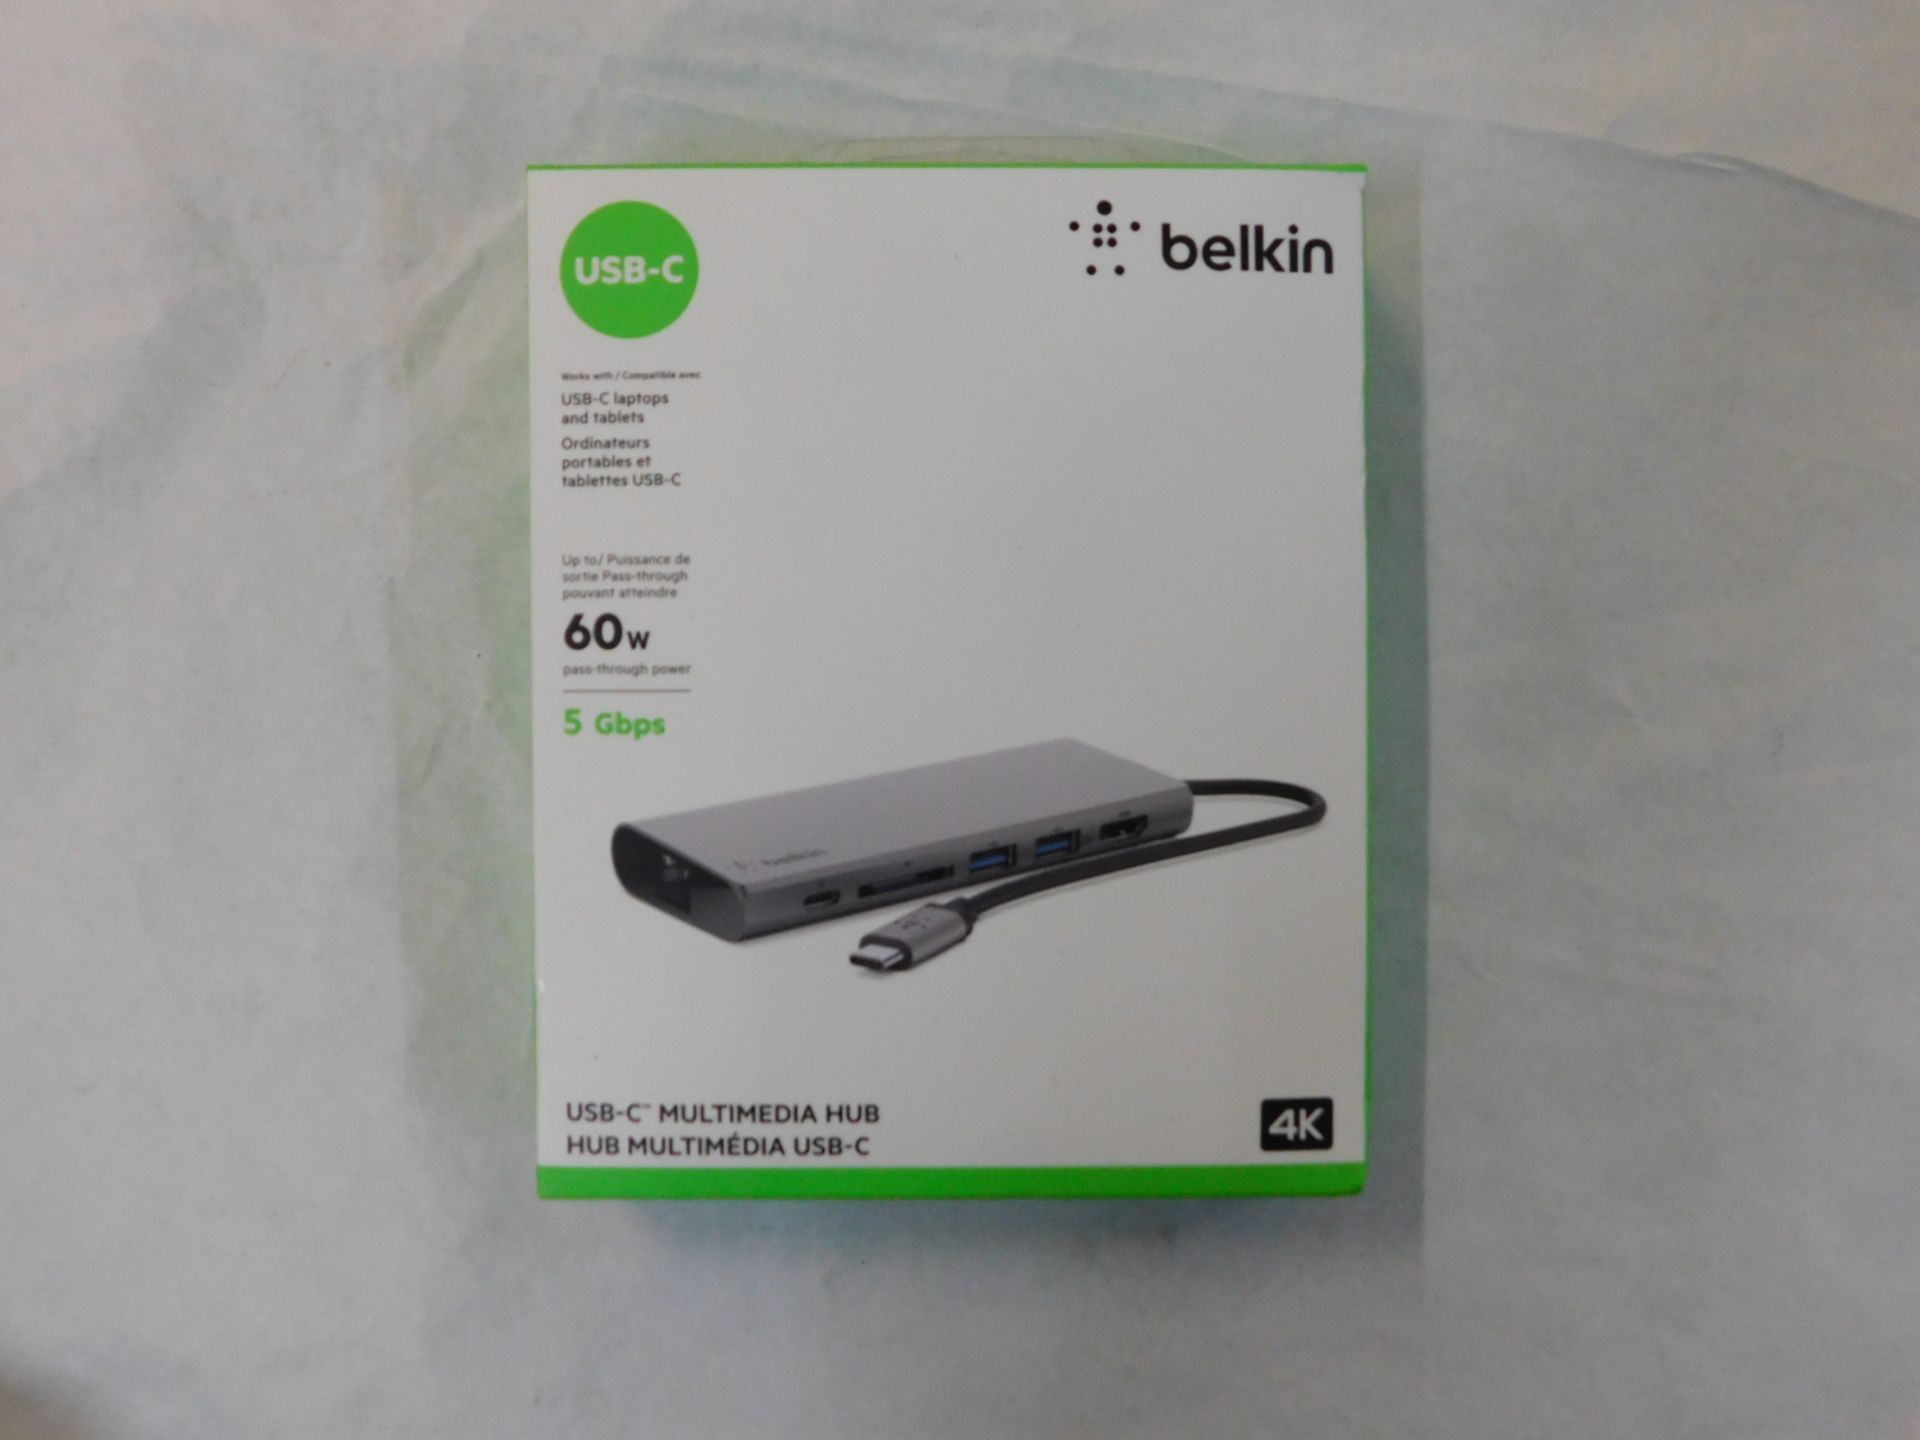 1 BOXED BELKIN USB-C 4K MULTIMEDIA HUB WITH TETHERED USB C CABLE RRP Â£49.99